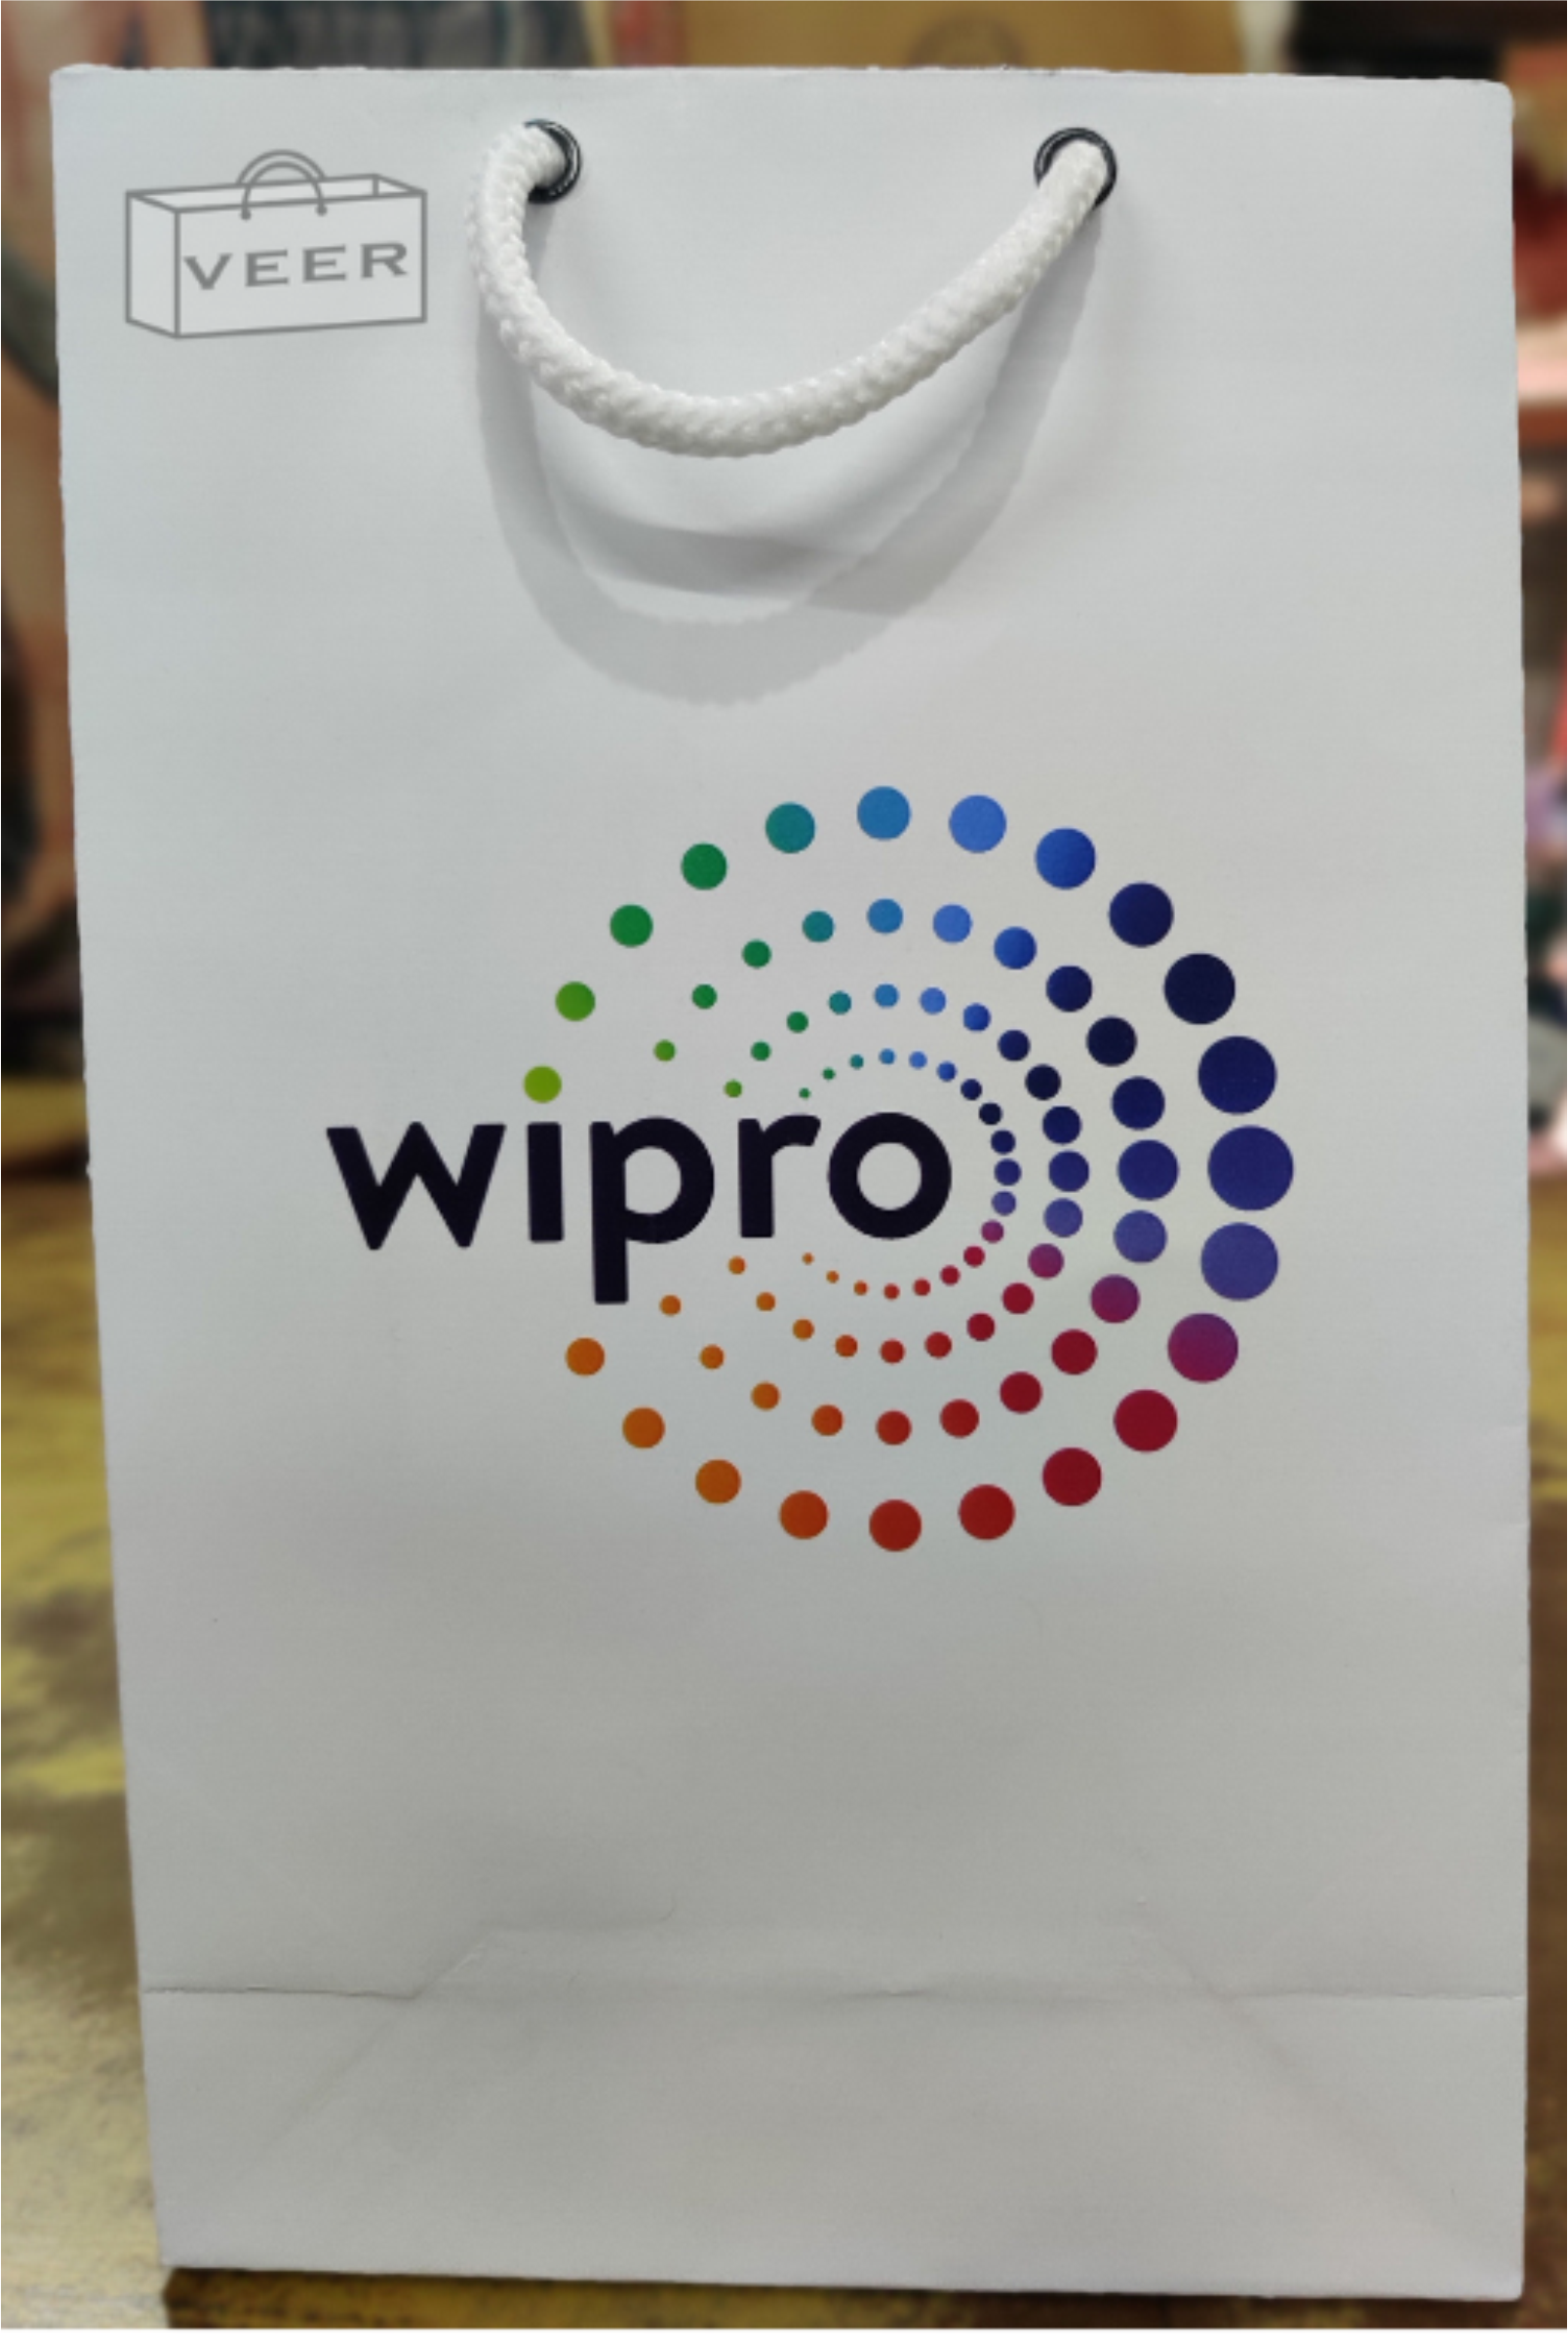 Wipro - Misplaced bags and the ordeal of identifying a luggage often lead  to customer dissatisfaction. Address the problems of mishandled baggage by  leveraging blockchain and IoT. https://bddy.me/2zqKRiY | Facebook